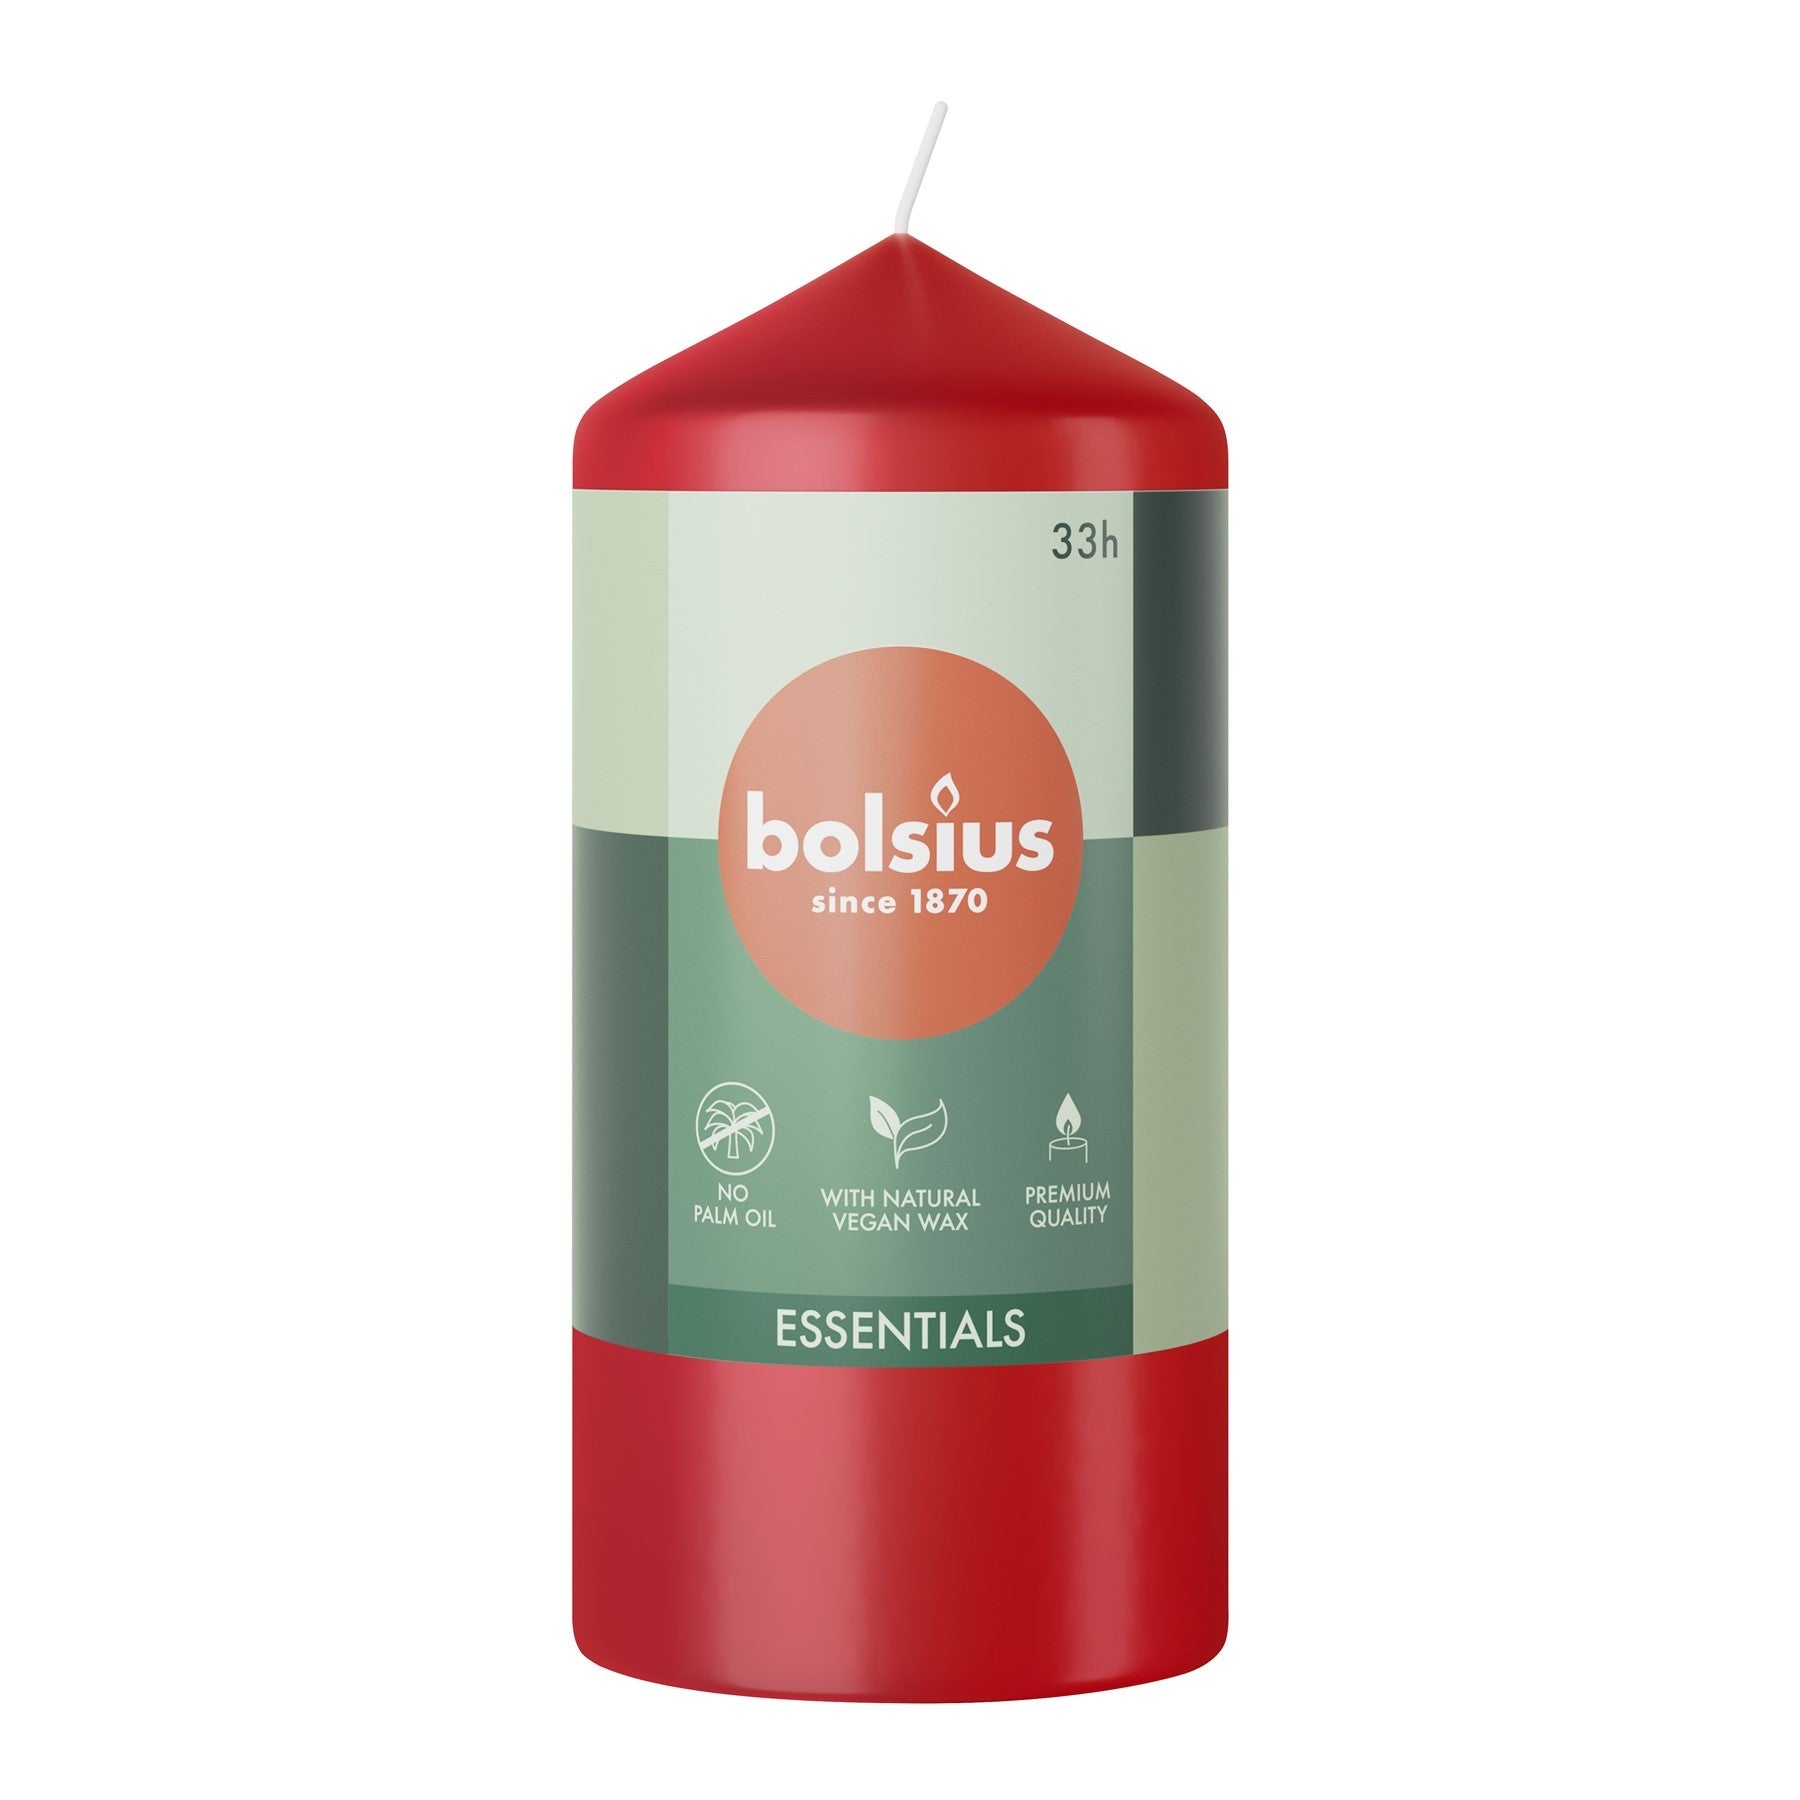 View Bolsius Delicate Red Essential Pillar Candle 120mm x 58mm information